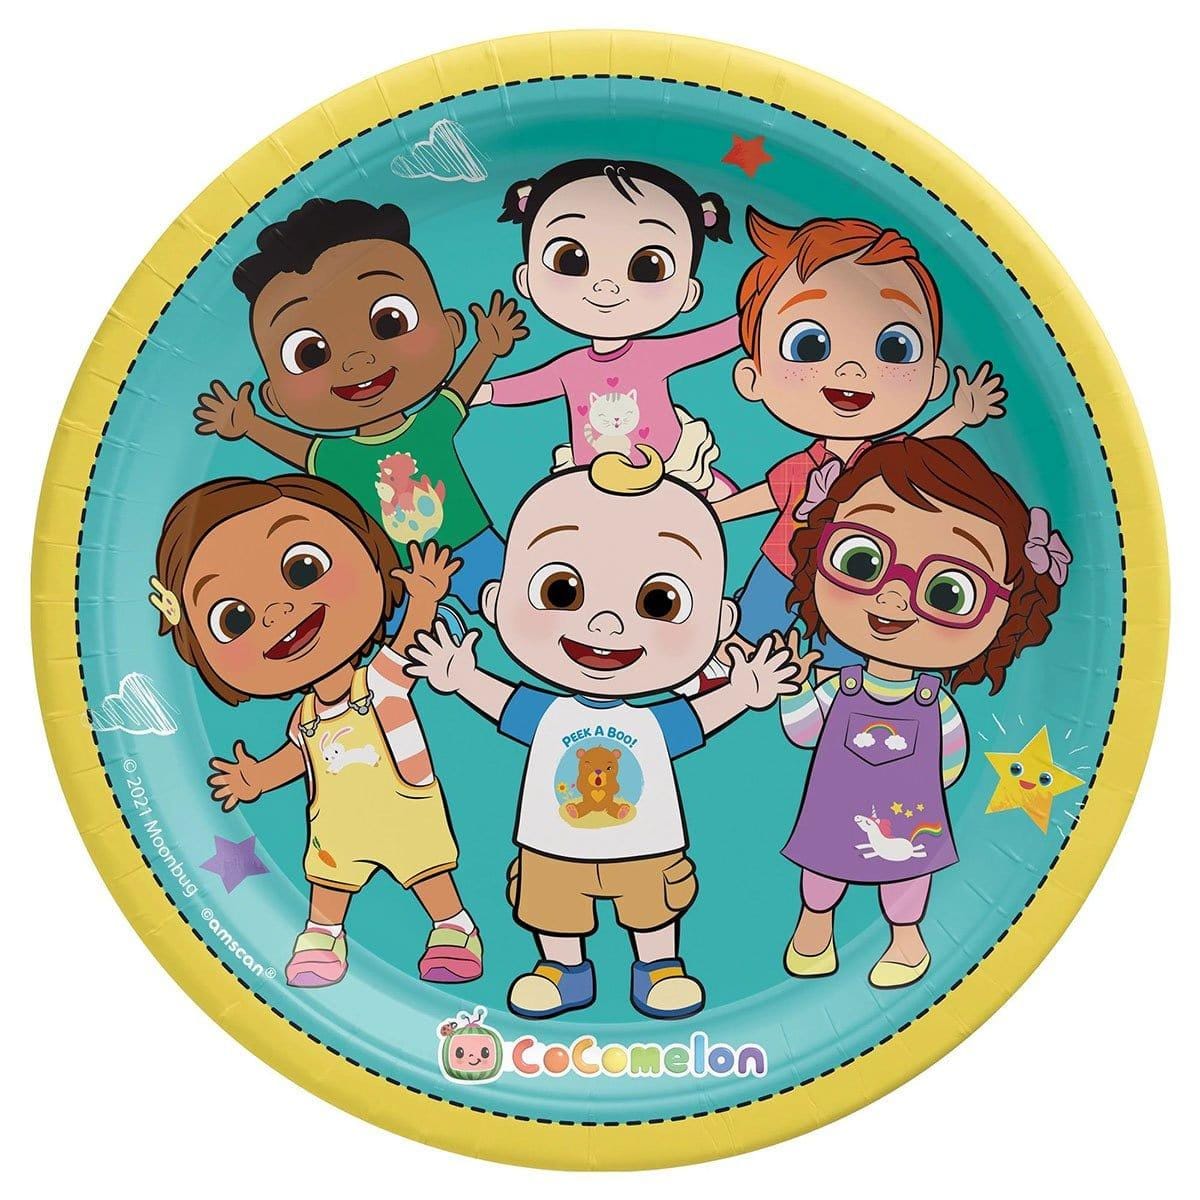 Buy Kids Birthday Cocomelon Dinner Plates 9 Inches, 8 Count sold at Party Expert